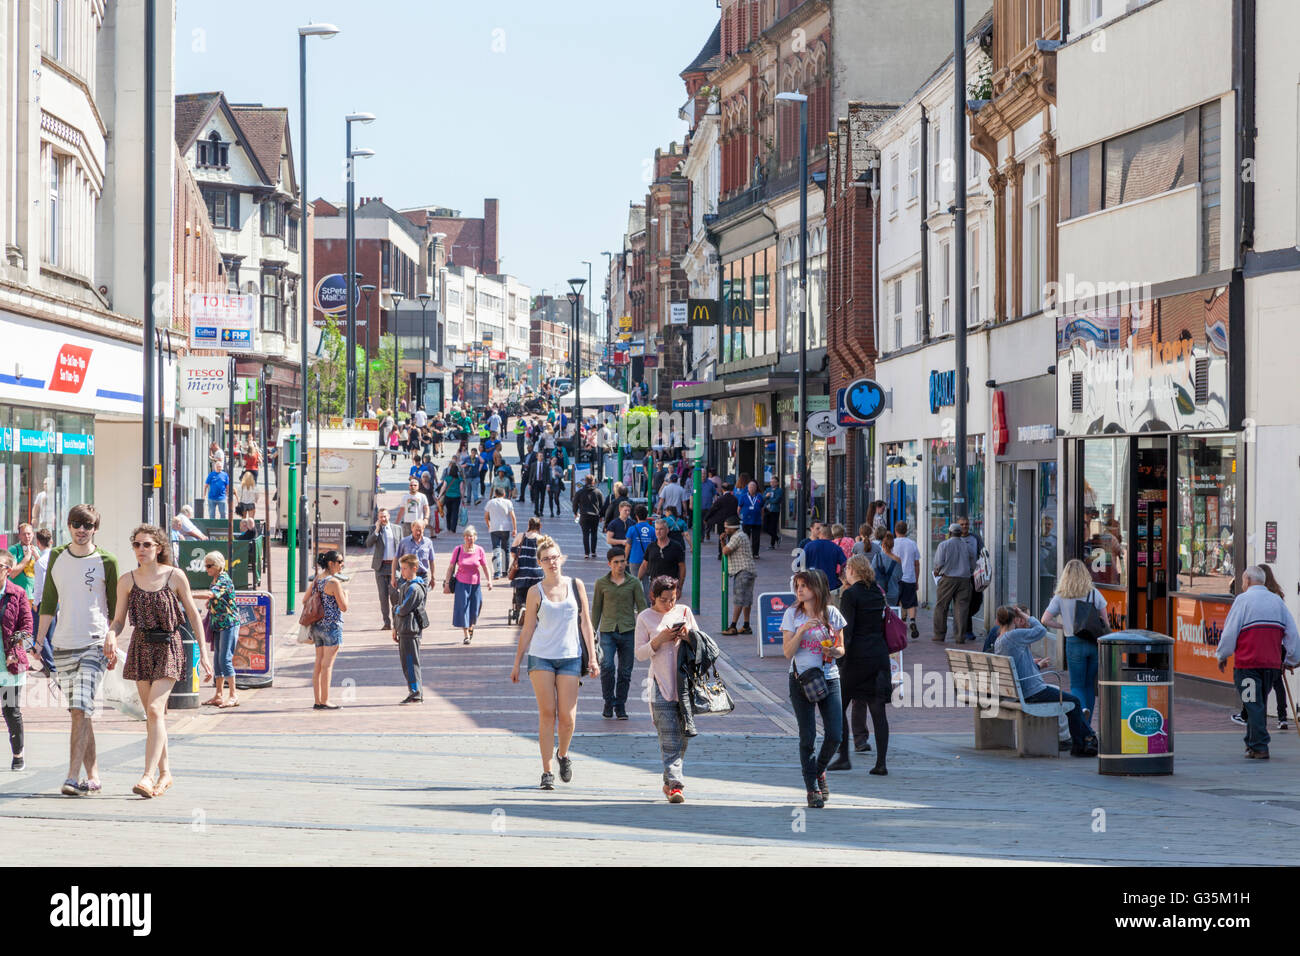 People shopping, St Peter's Street, Derby City Centre, England, Regno Unito Foto Stock